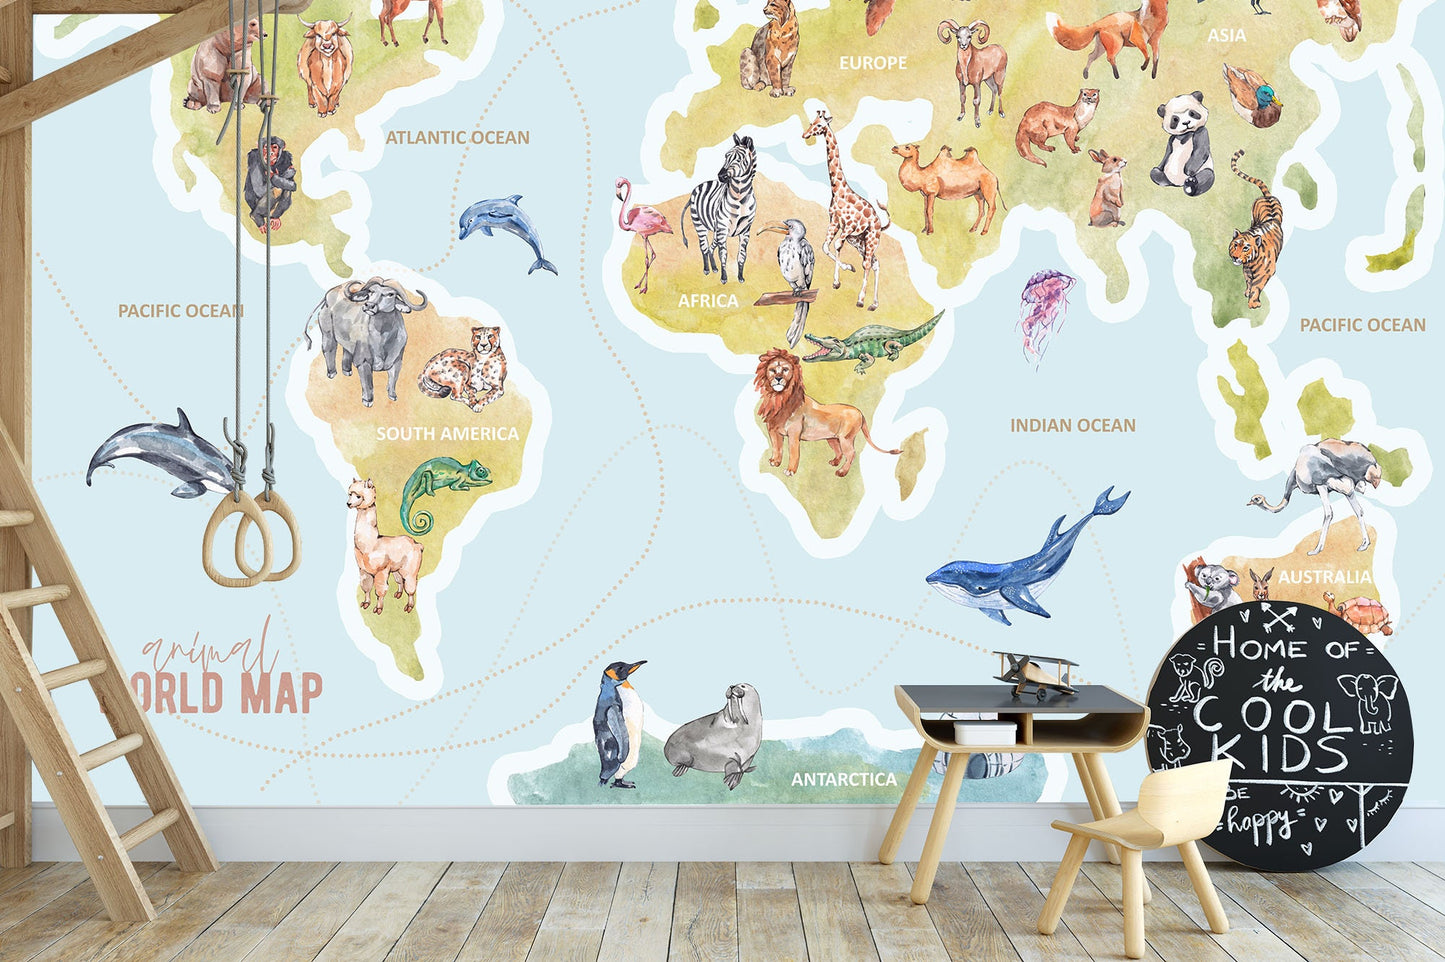 Educational World Map Peel and Stick Wall Mural - Famous Icons Animals and Continents - WM020